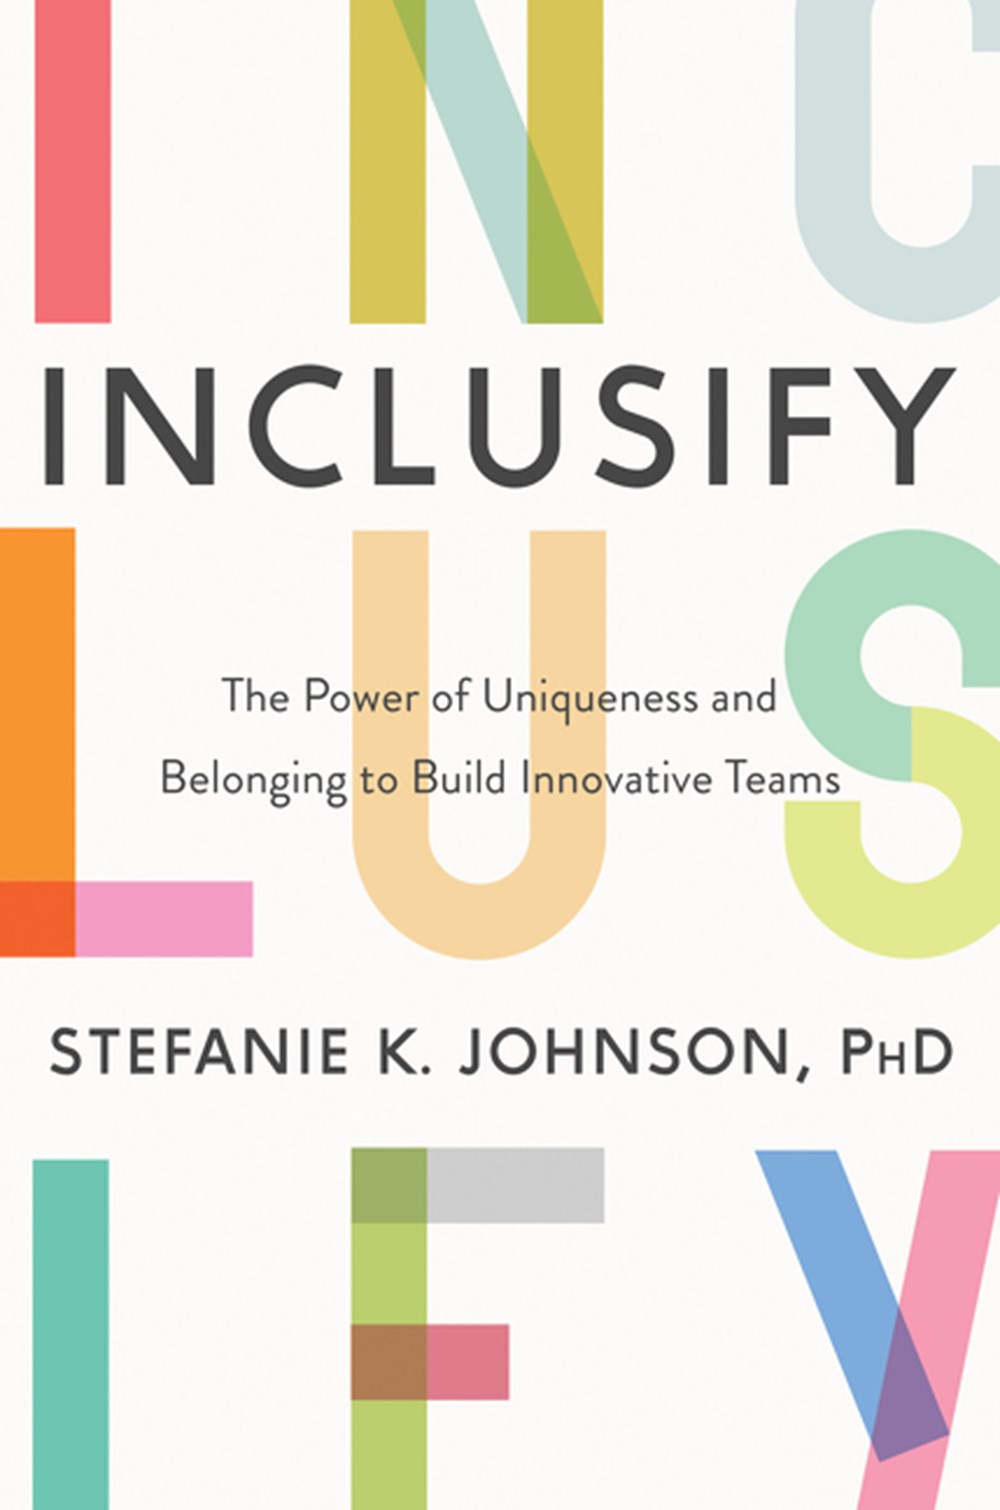 Inclusify The Power of Uniqueness and Belonging to Build Innovative Teams